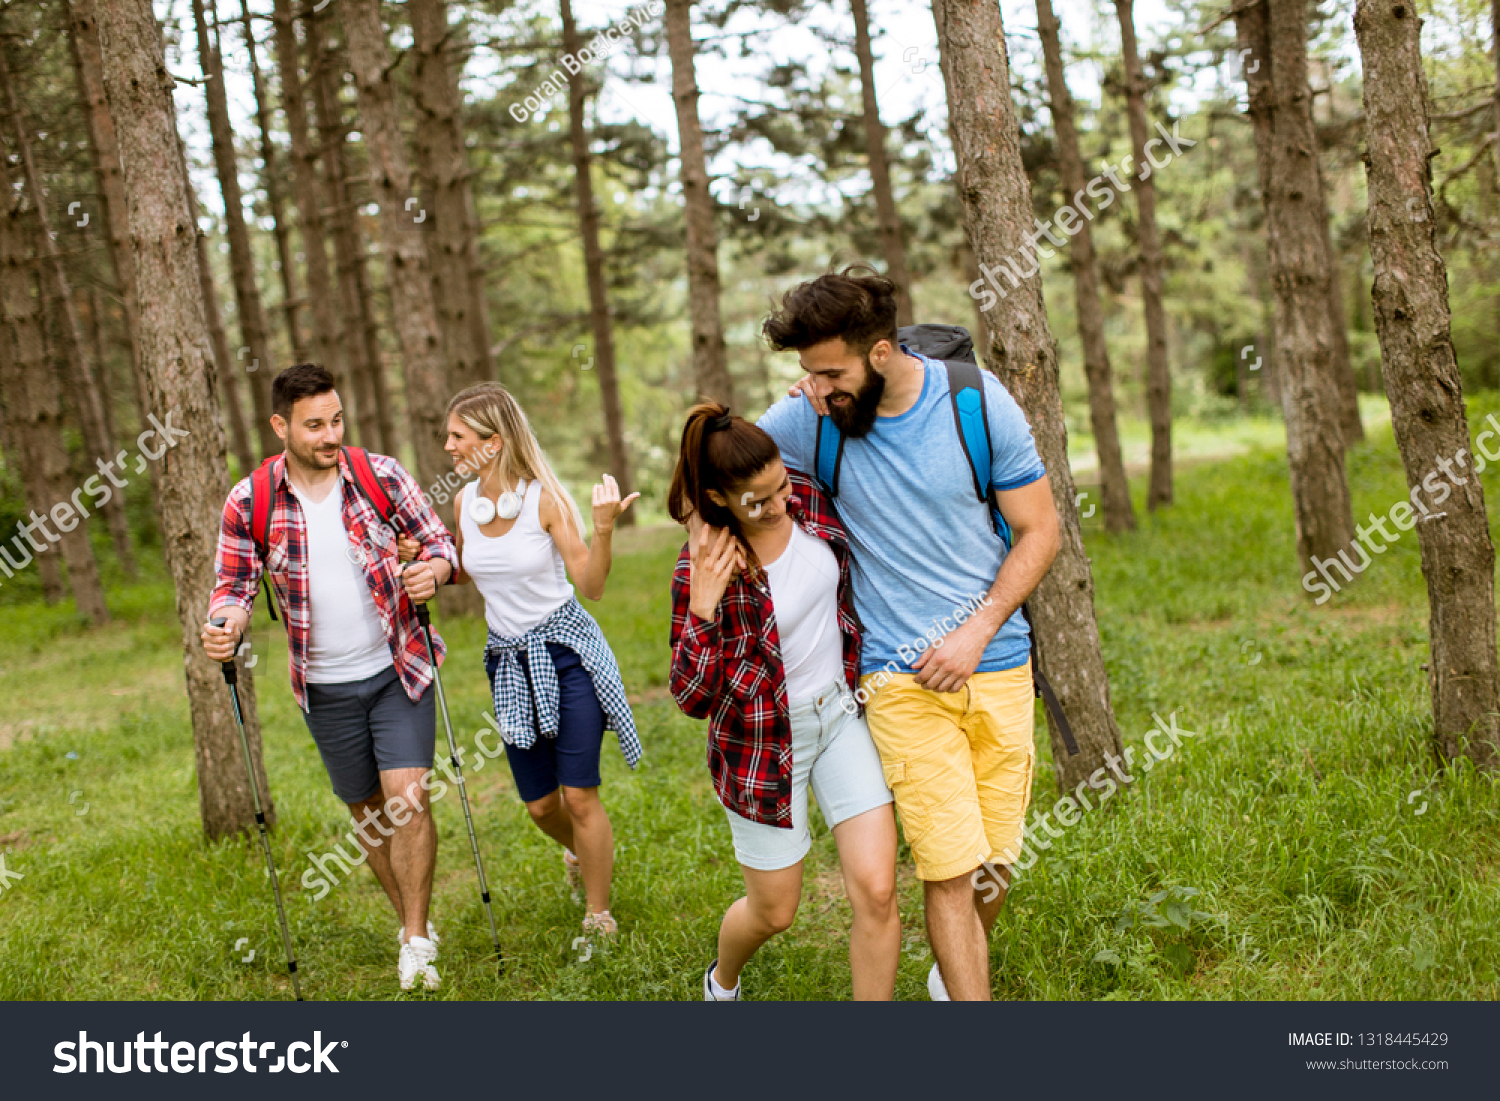 Group of four friends hiking together through a forest at sunny day #1318445429